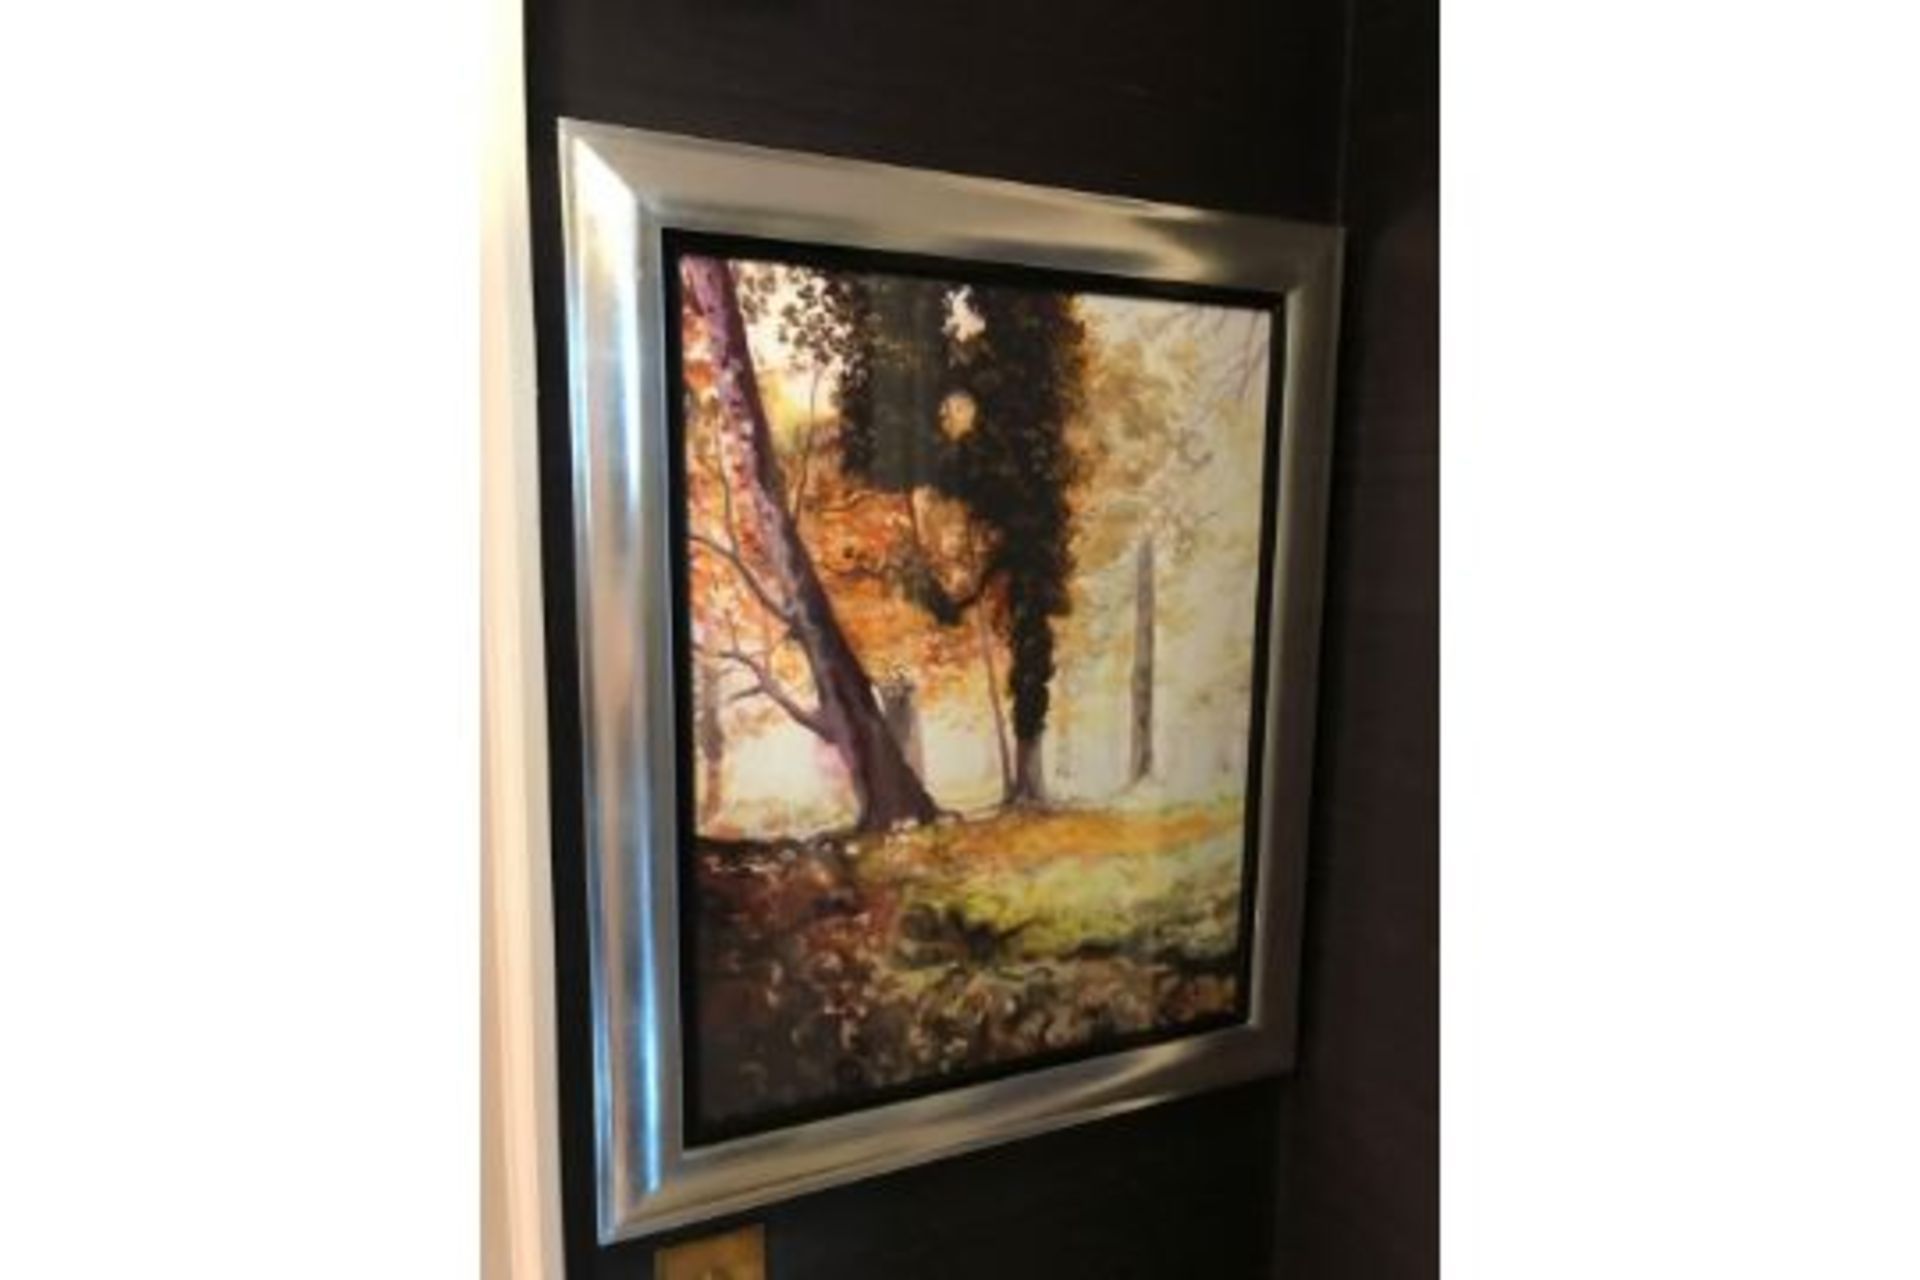 Framed Lithograph Silver Frame Depicting Trees 85 x 65cm - Image 2 of 2